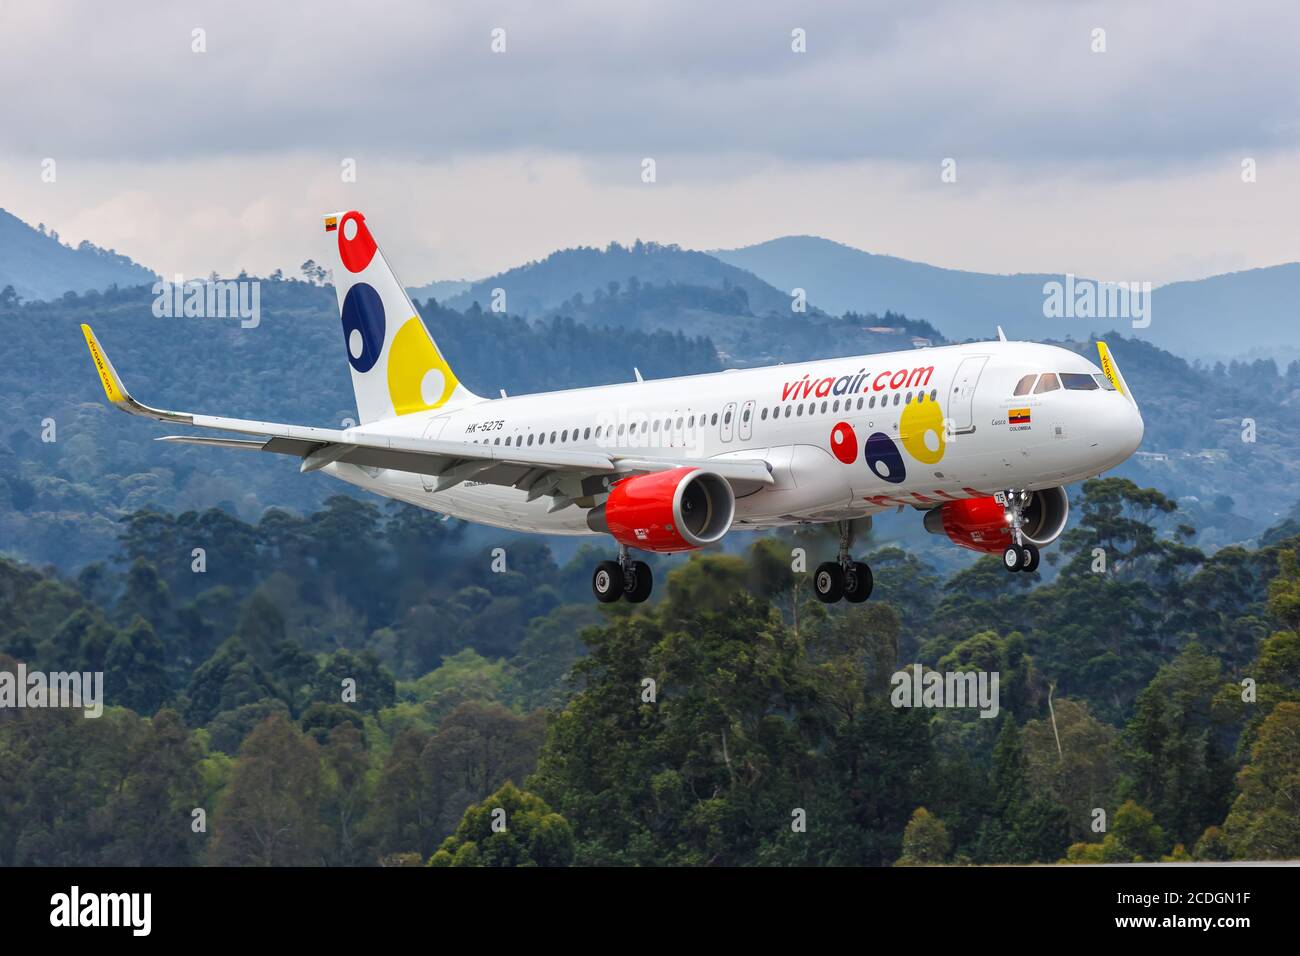 Medellin, Colombia - January 25, 2019: Vivaair Airbus A320 airplane at Medellin Rionegro Airport (MDE) in Colombia. Airbus is a European aircraft manu Stock Photo